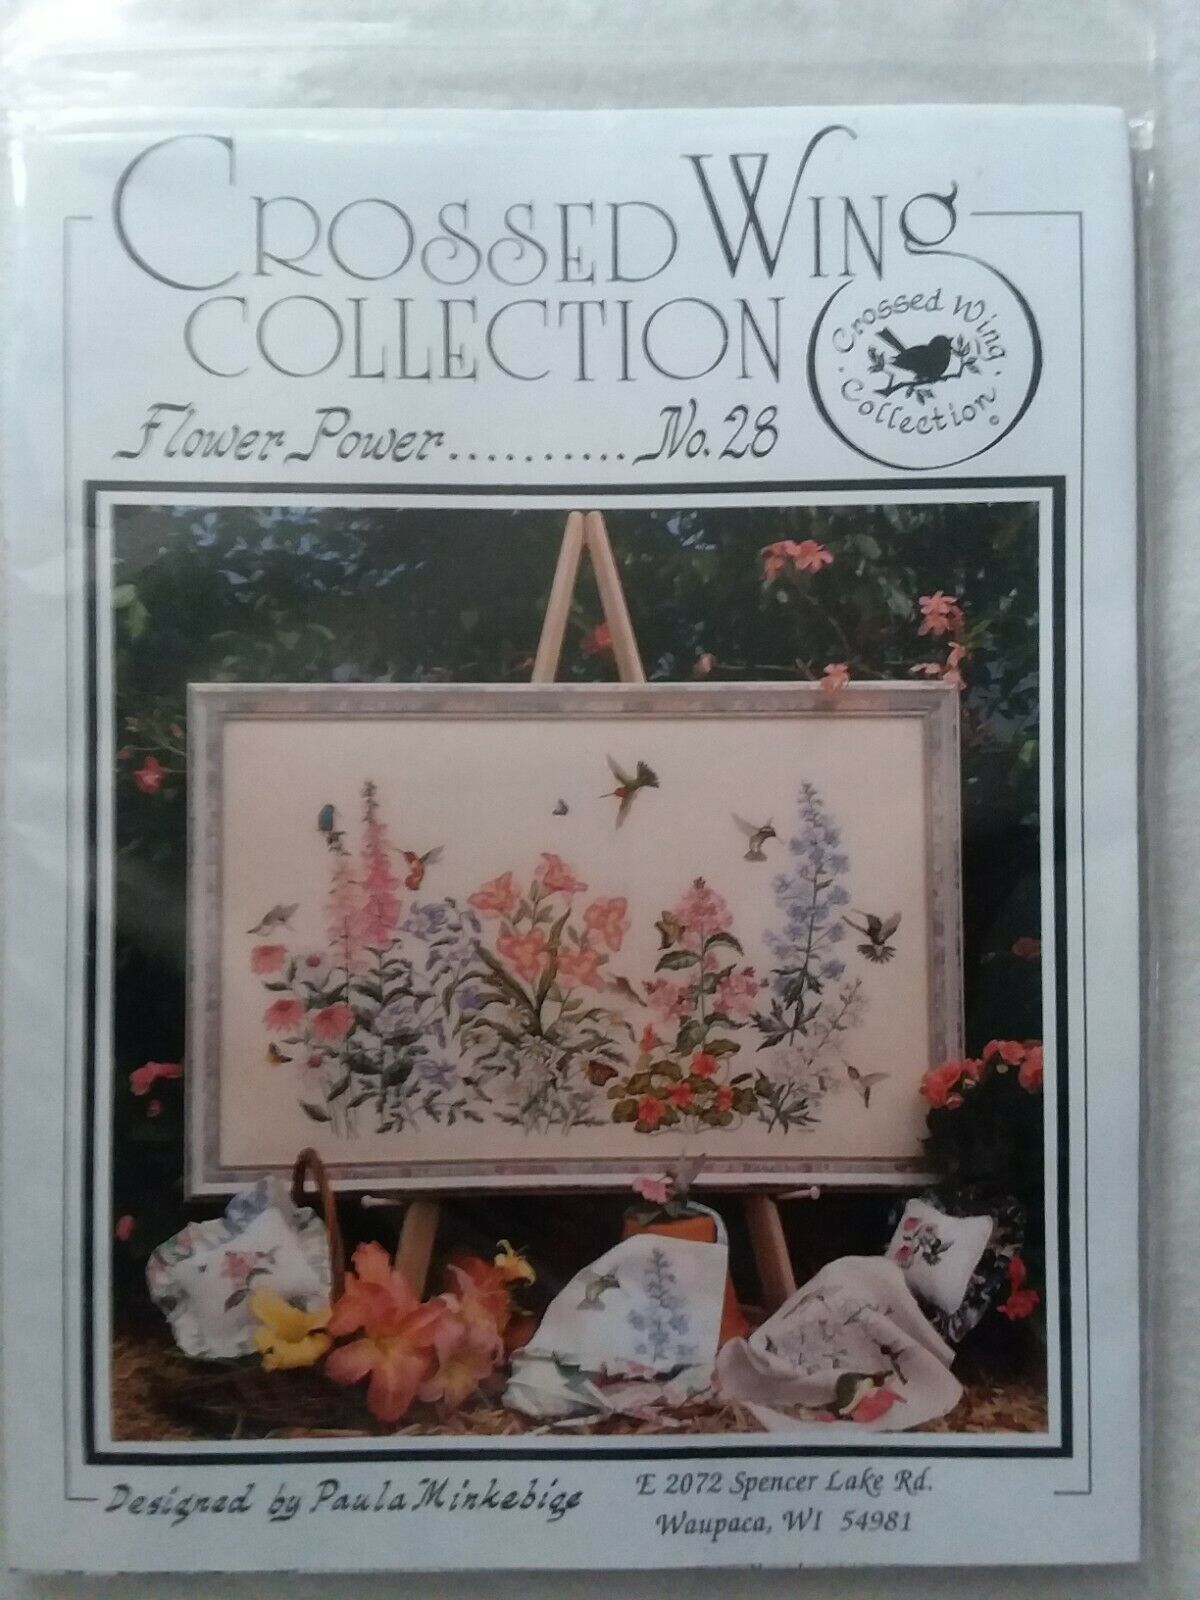 NEW Crossed Wing Collection Counted Cross Stitch Pattern Flower Power #28 NIP - $26.99